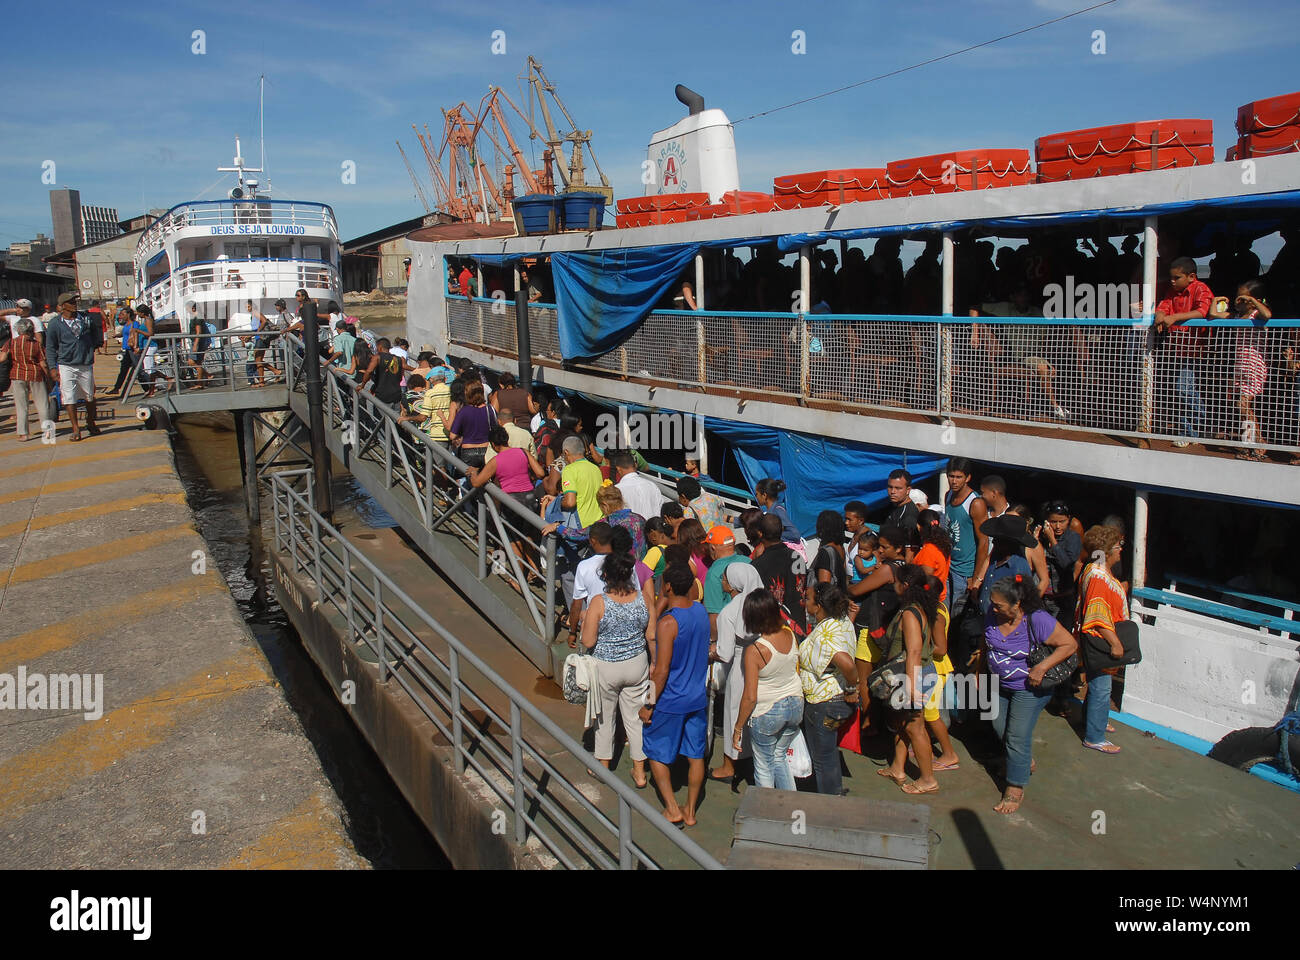 Belém, Brazil, October 16, 2006. People disembarking from regional boats in the port of Belem in the state of Pará. Stock Photo